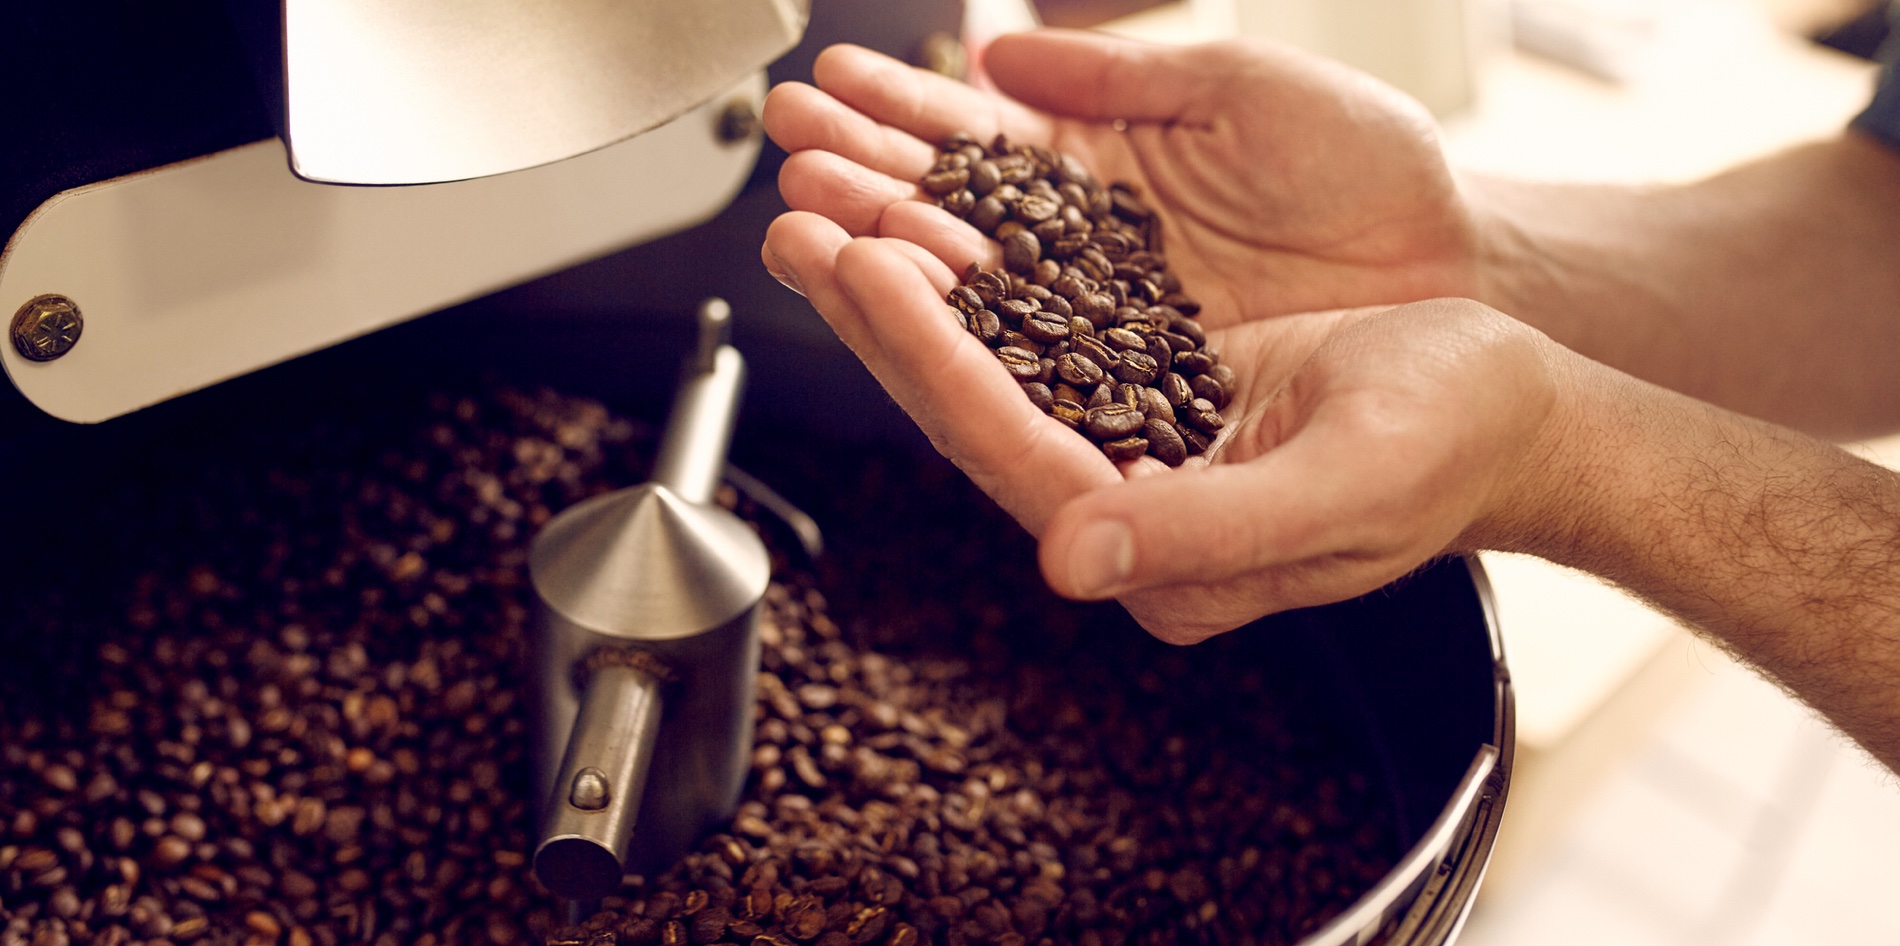 Cropped shot of a man's hands holding freshly roastd aromatic coffee beans over a modern machine used for roasting beans